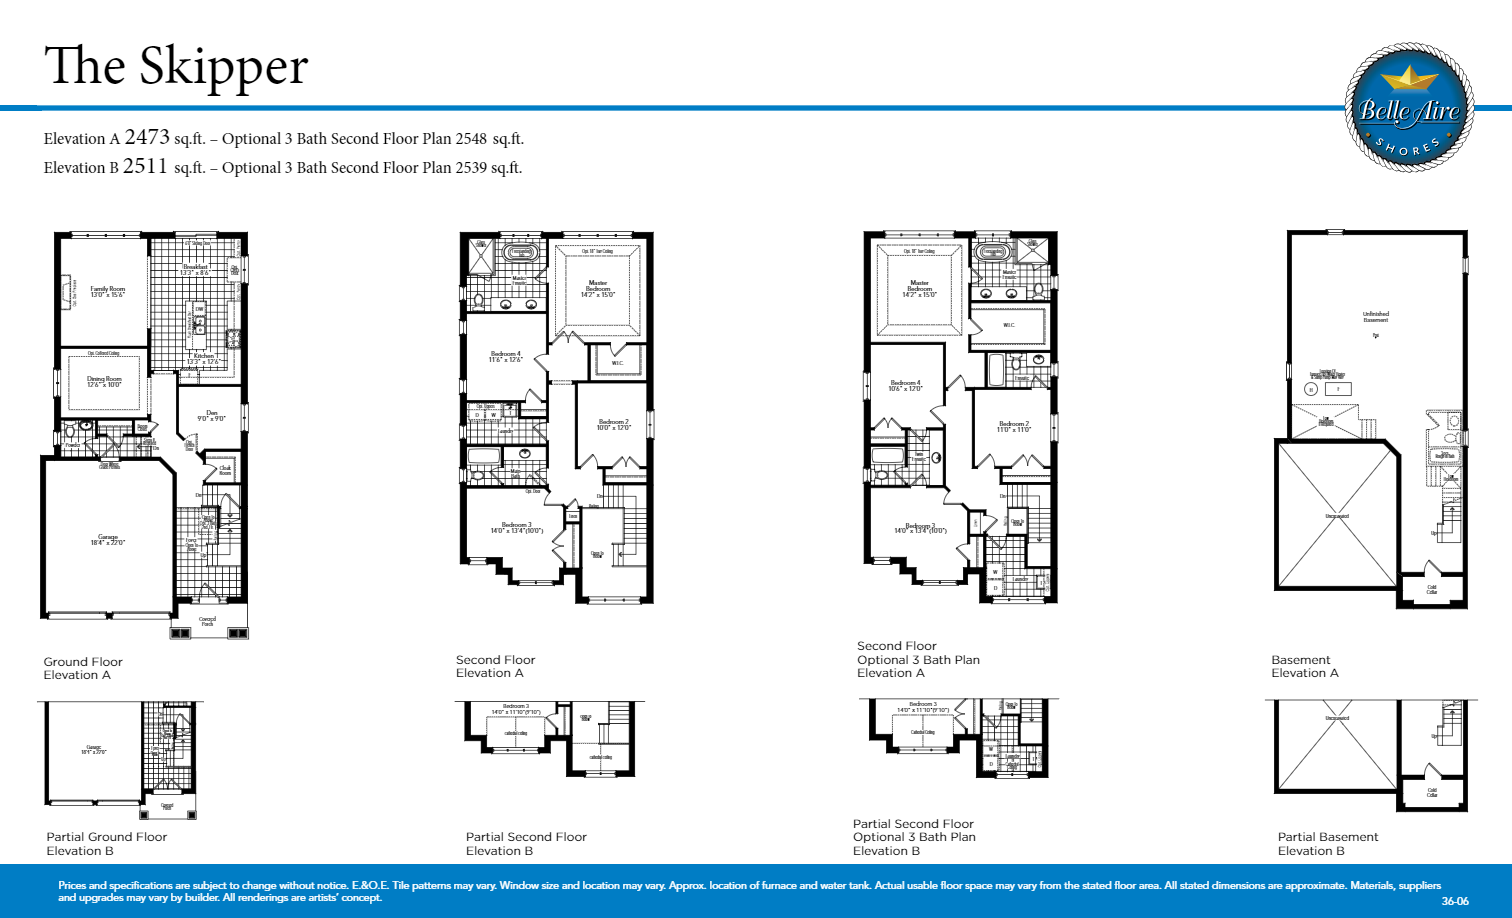  Floor Plan of Belle Aire Shores with undefined beds